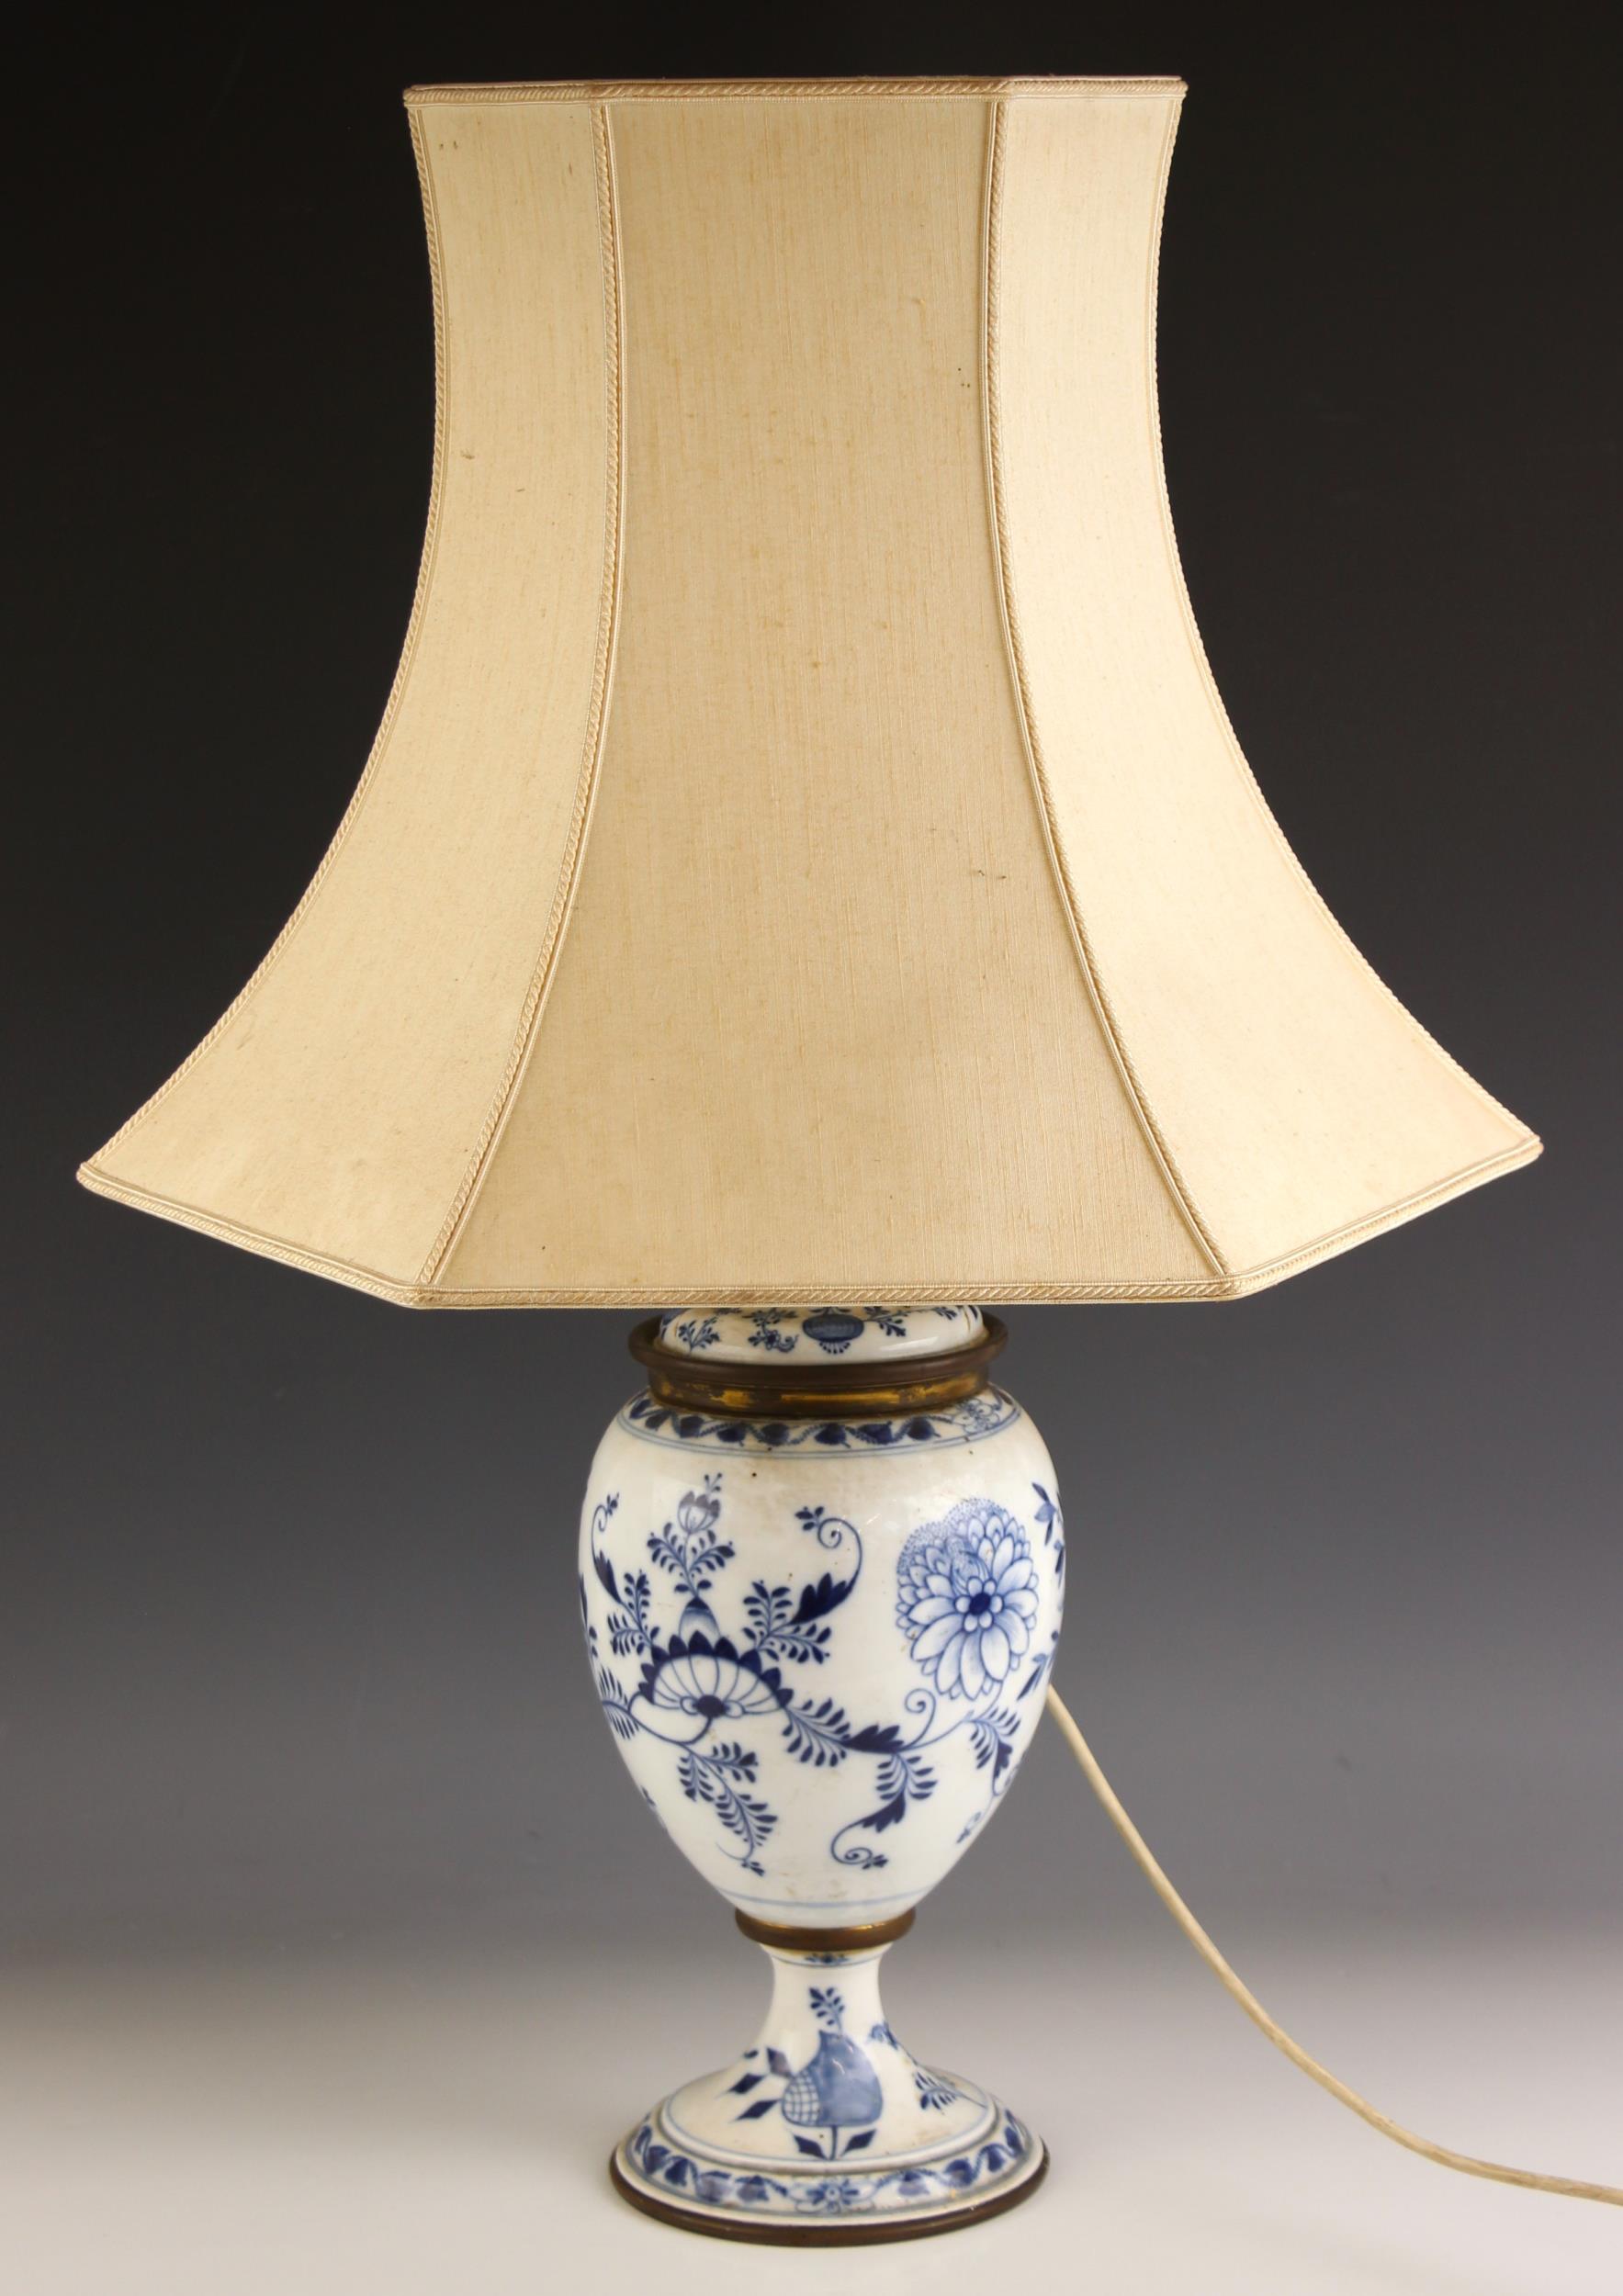 A Meissen porcelain Onion pattern blue and white lamp base, of baluster form with removable cover - Image 3 of 6